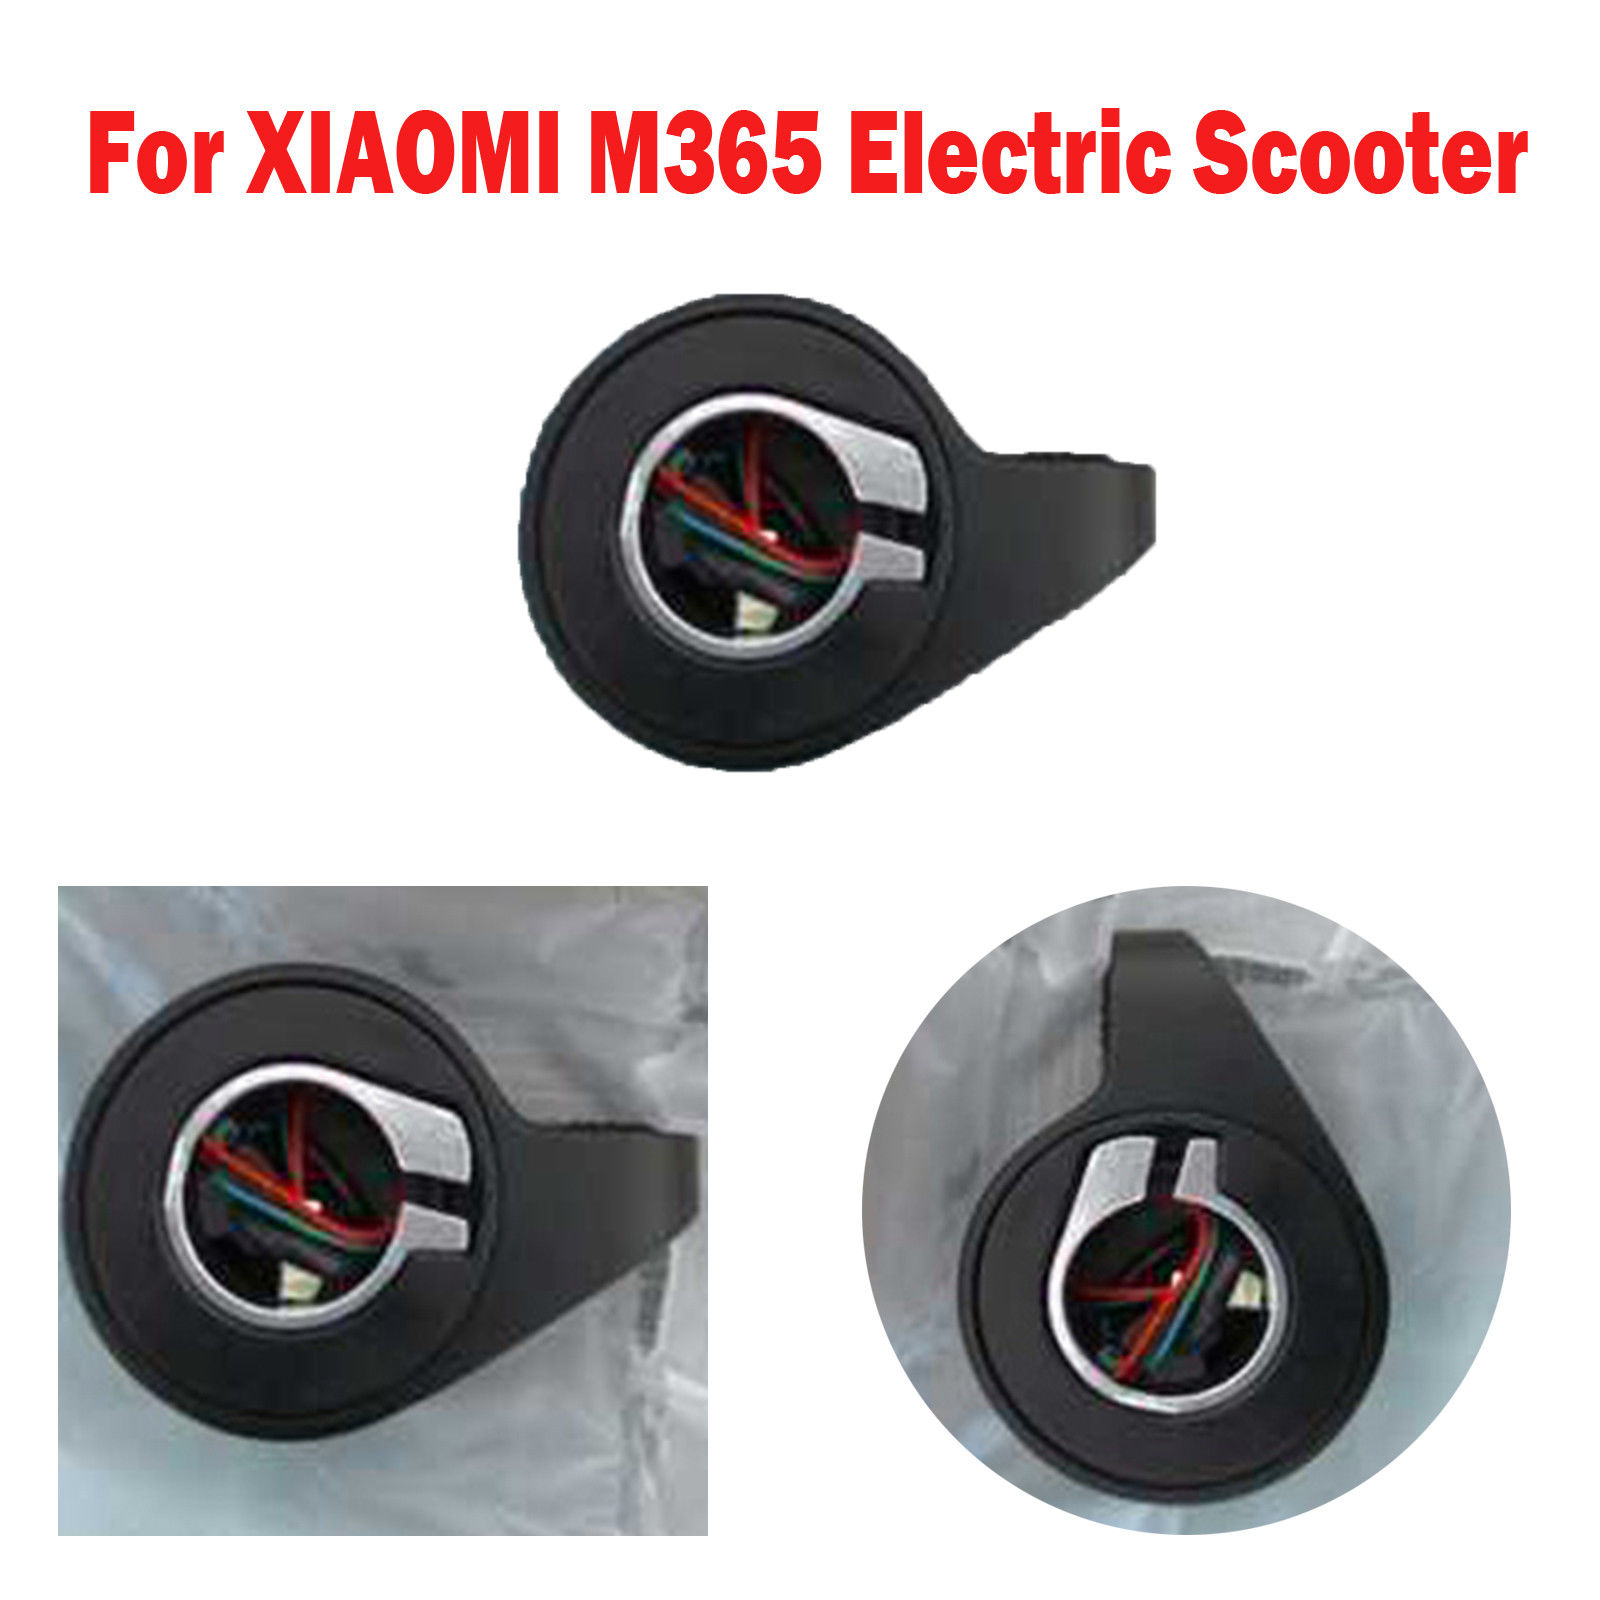 Xiaomi M365 1S Scooter Roller Gas Gaspedal Bremse 5